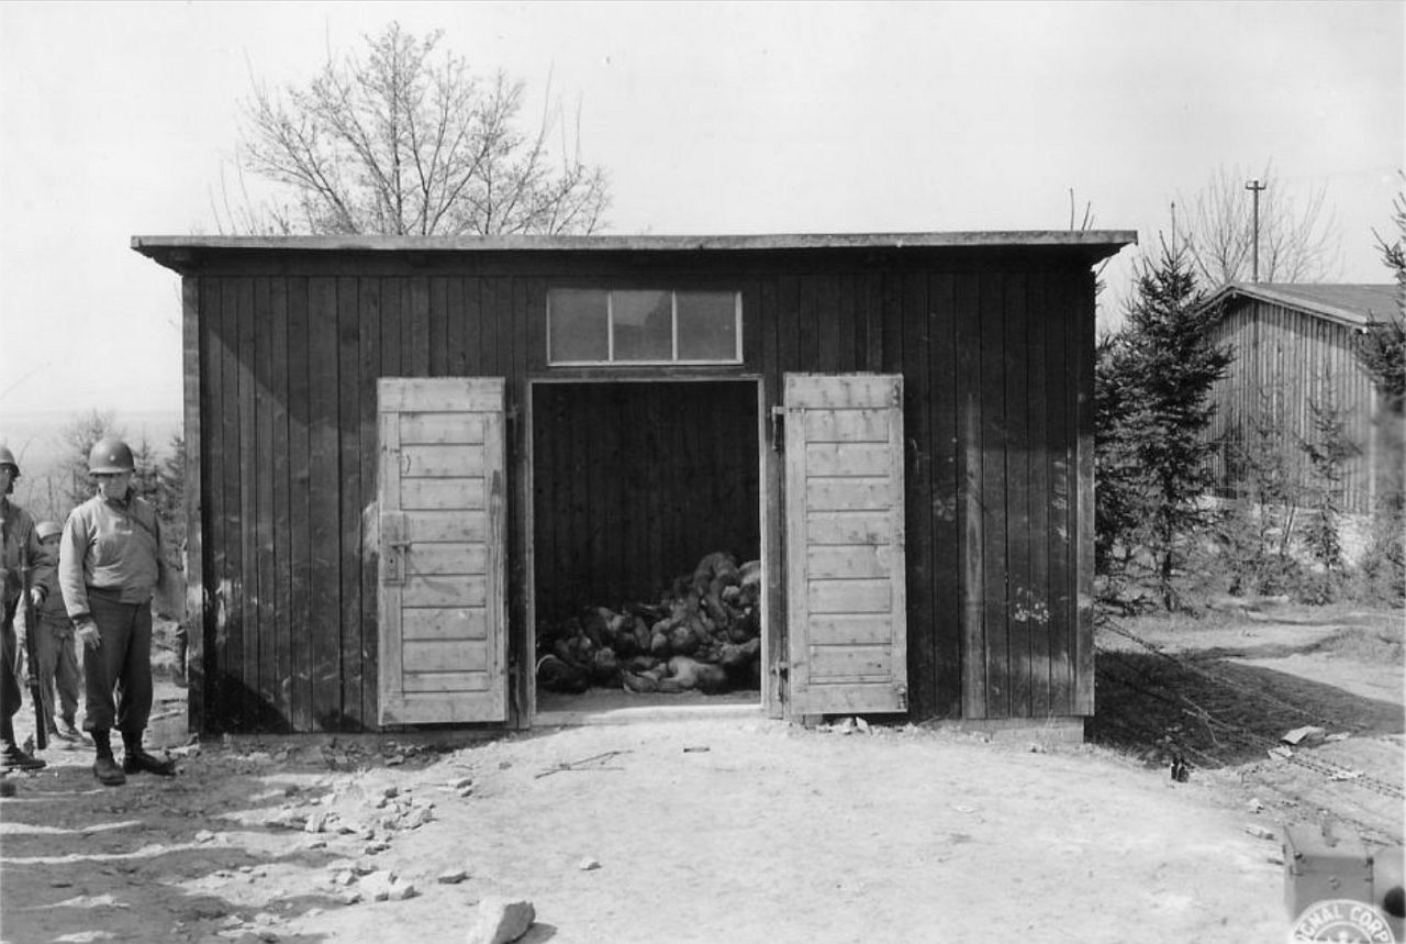 View into a barrack of the Ohrdruf subcamp, where stacked corpses of deceased prisoners lie. American soldiers are standing next to the open door.